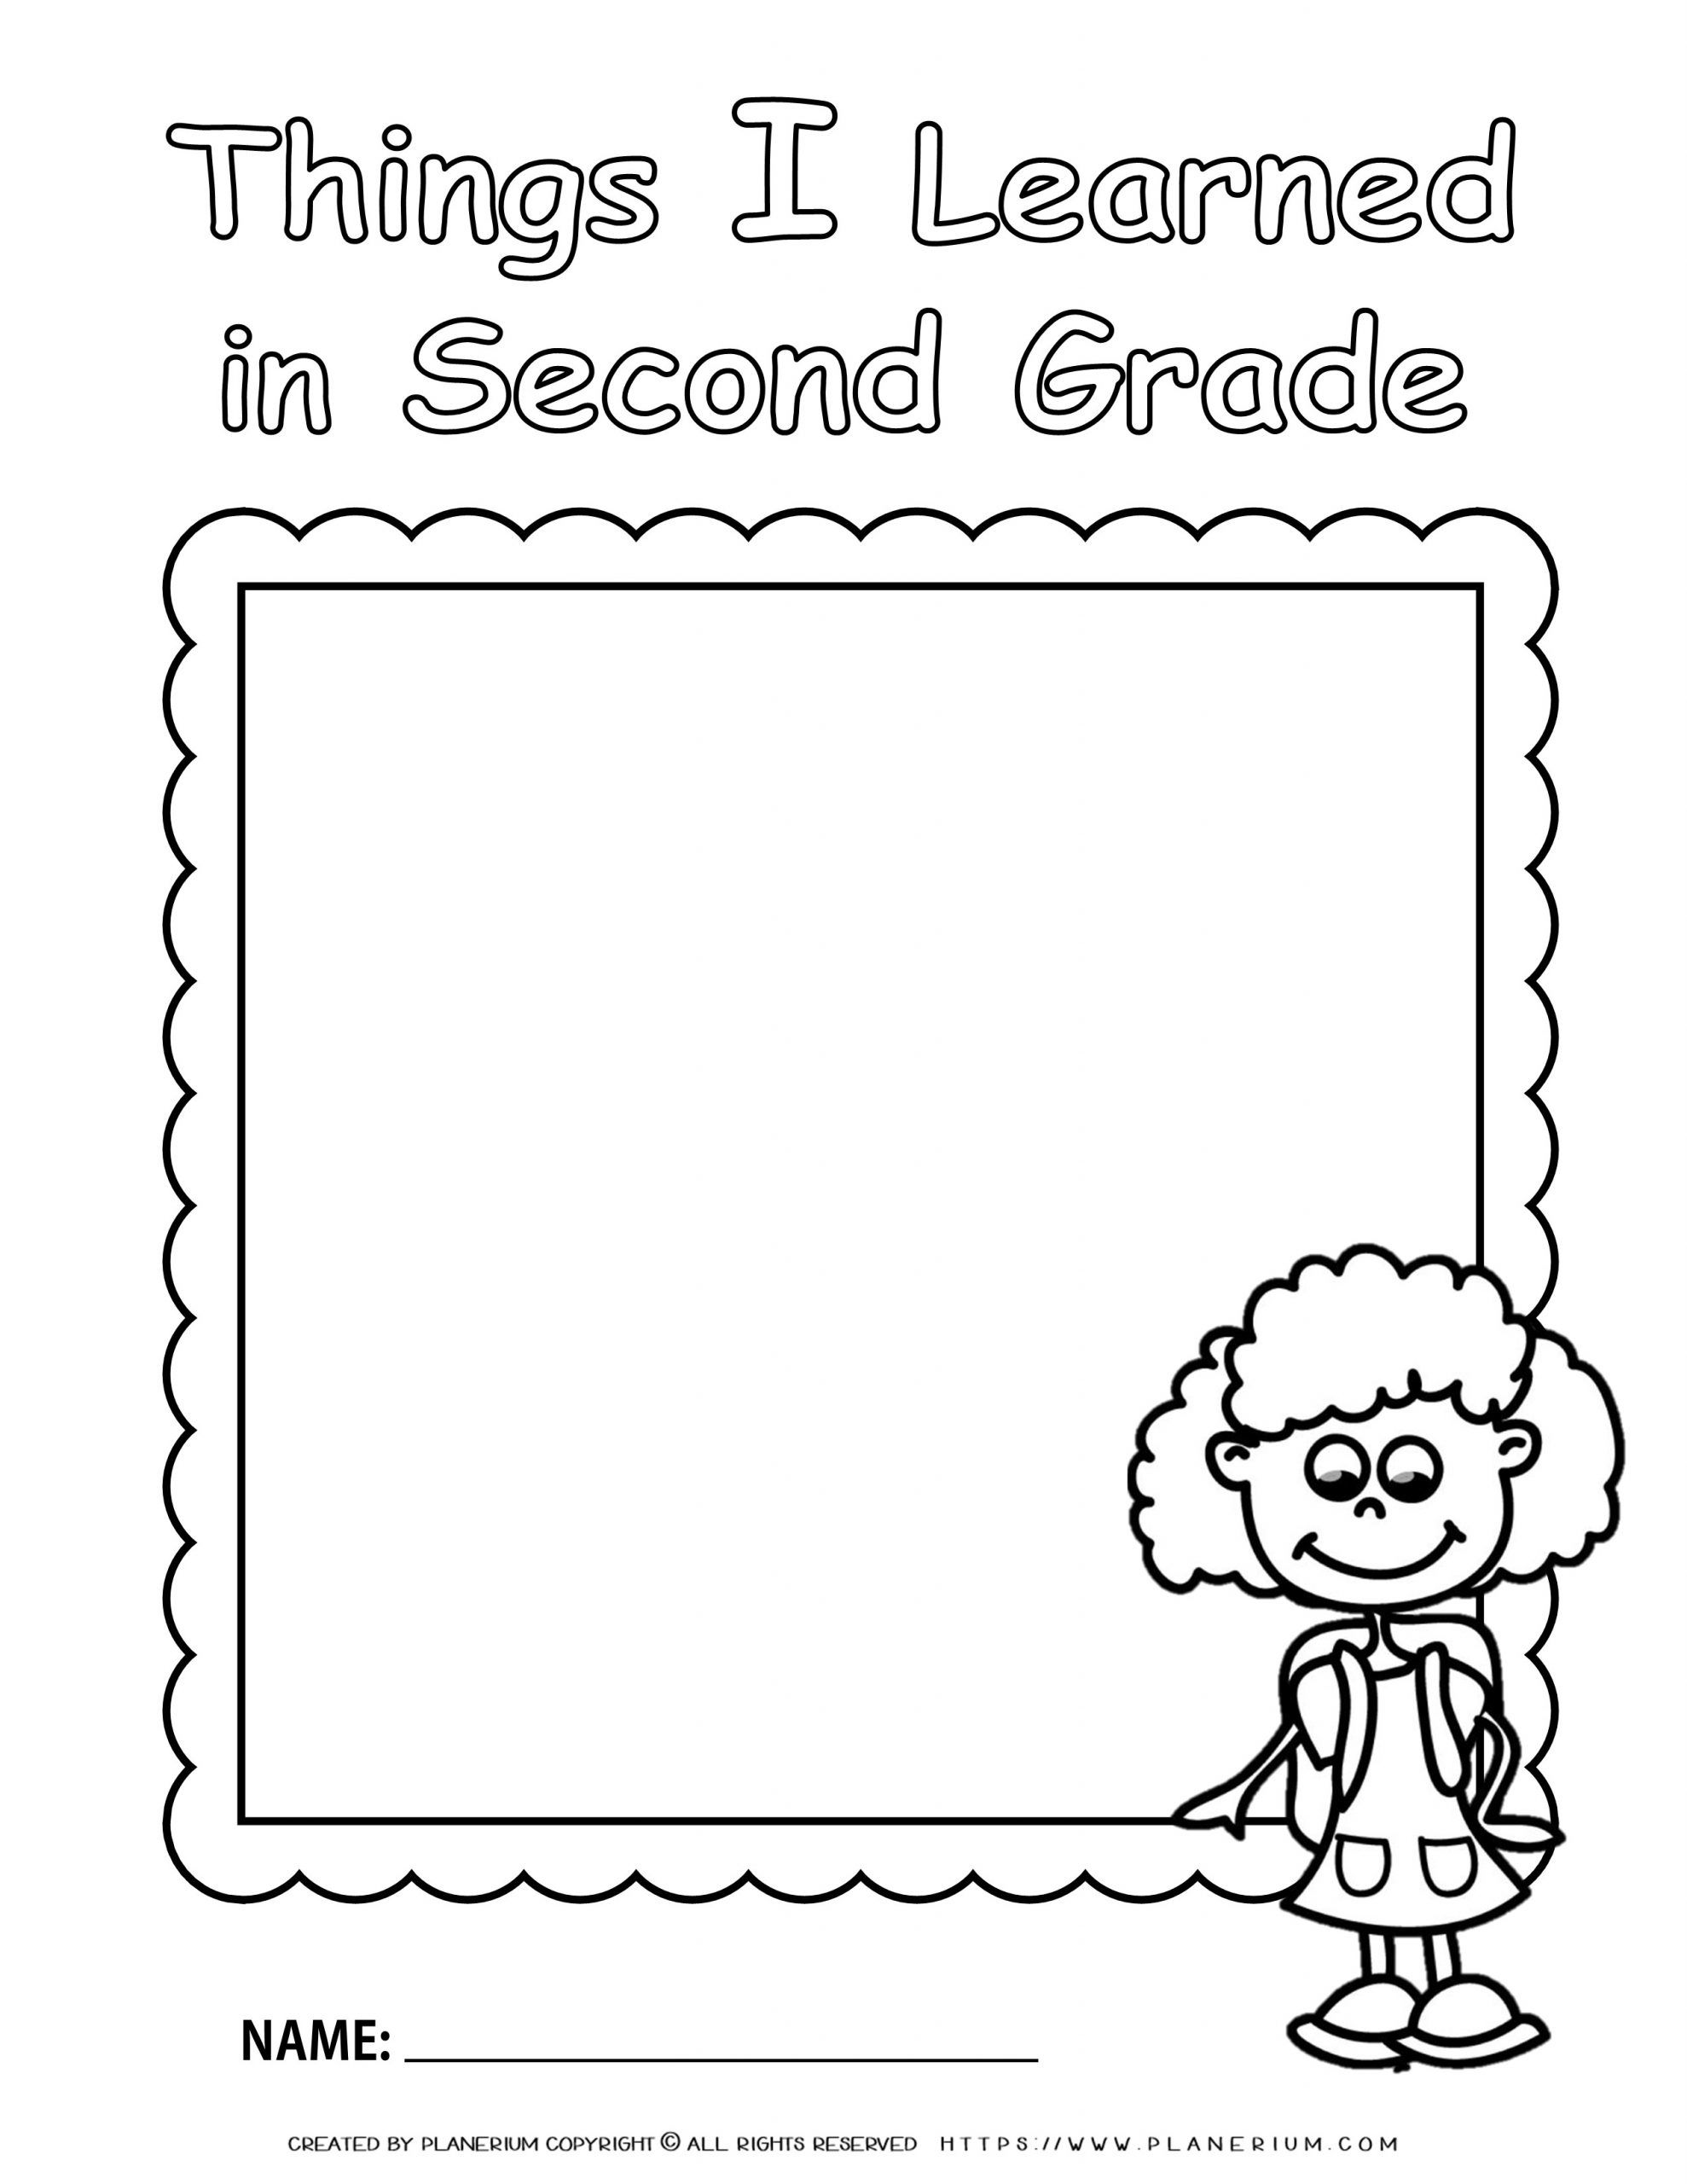 end-of-year-worksheet-second-grade-review-for-girl-planerium